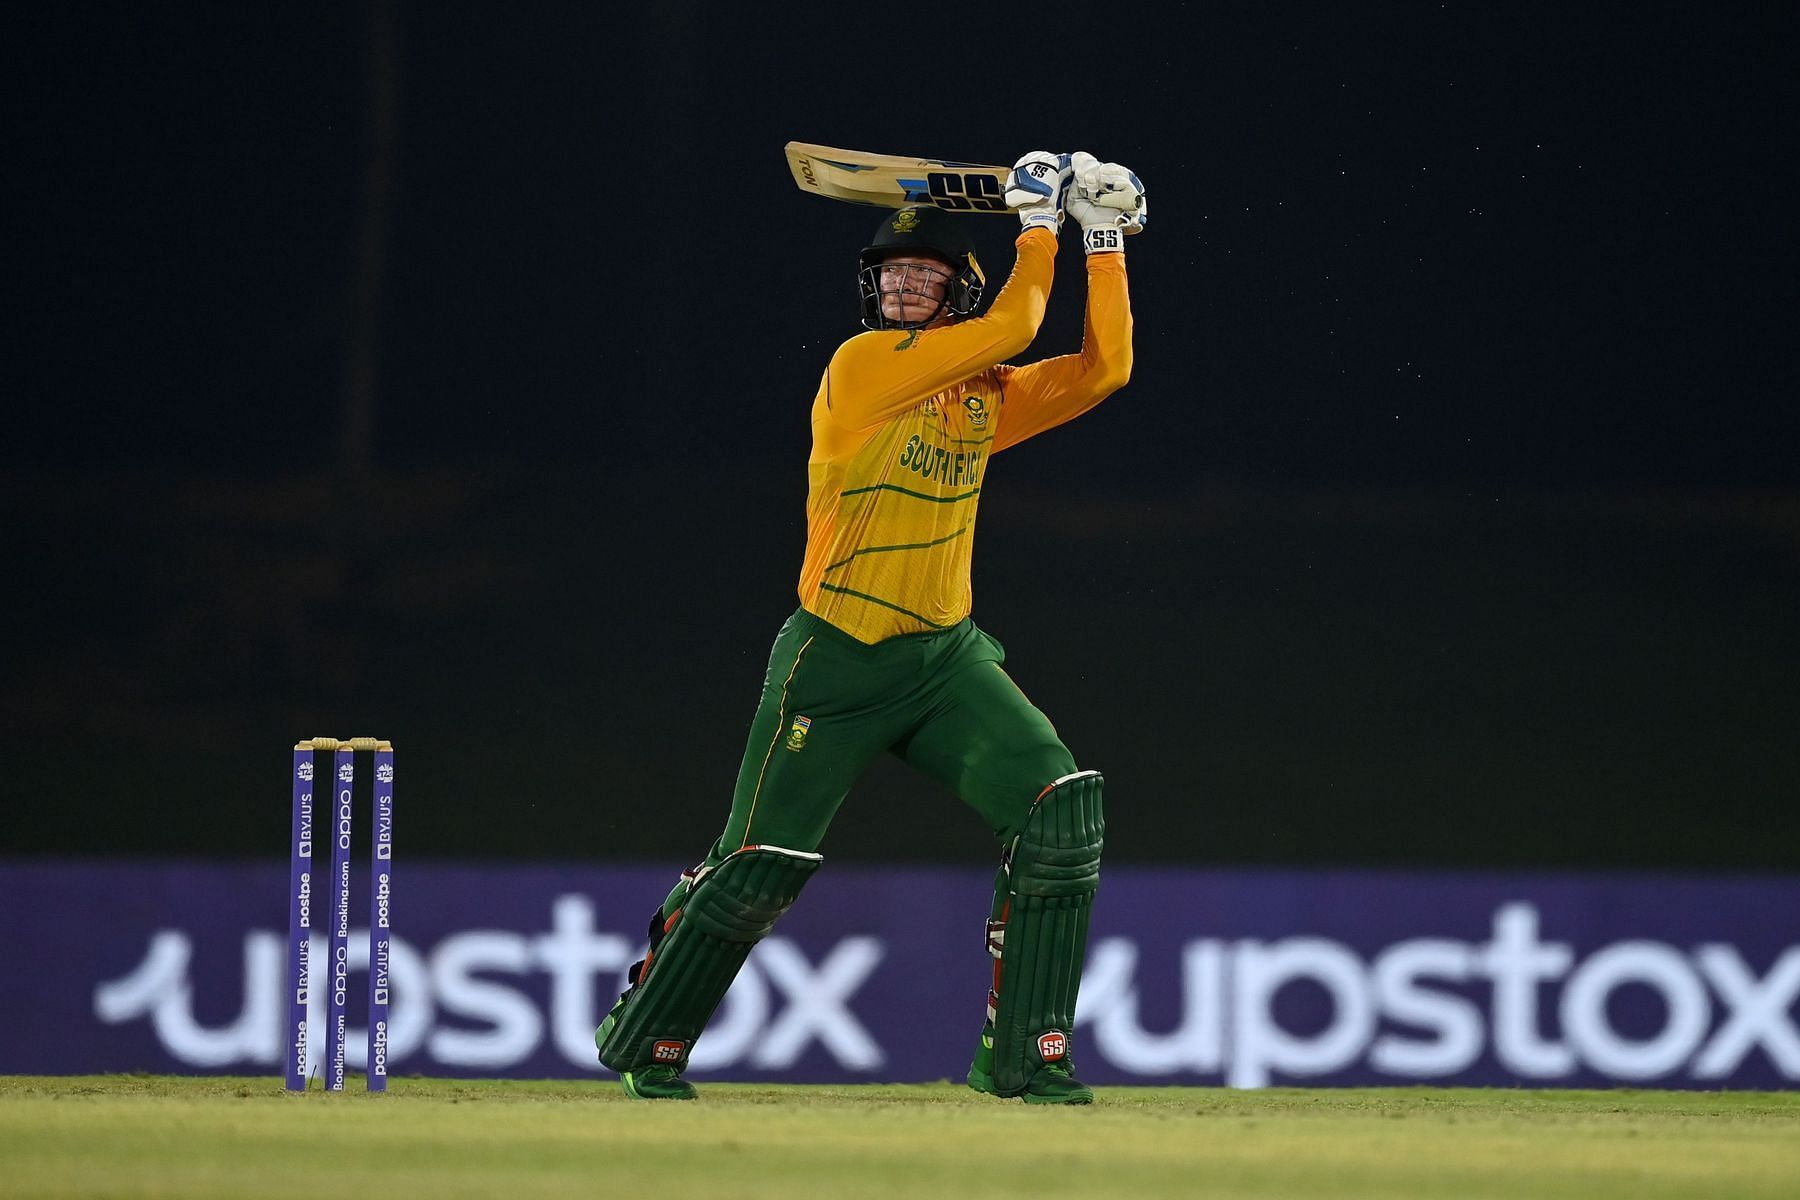 Rassie van der Dussen narrowly missed out on playing in IPL 2021 but is a hot favourite to find a team in the mega auction.